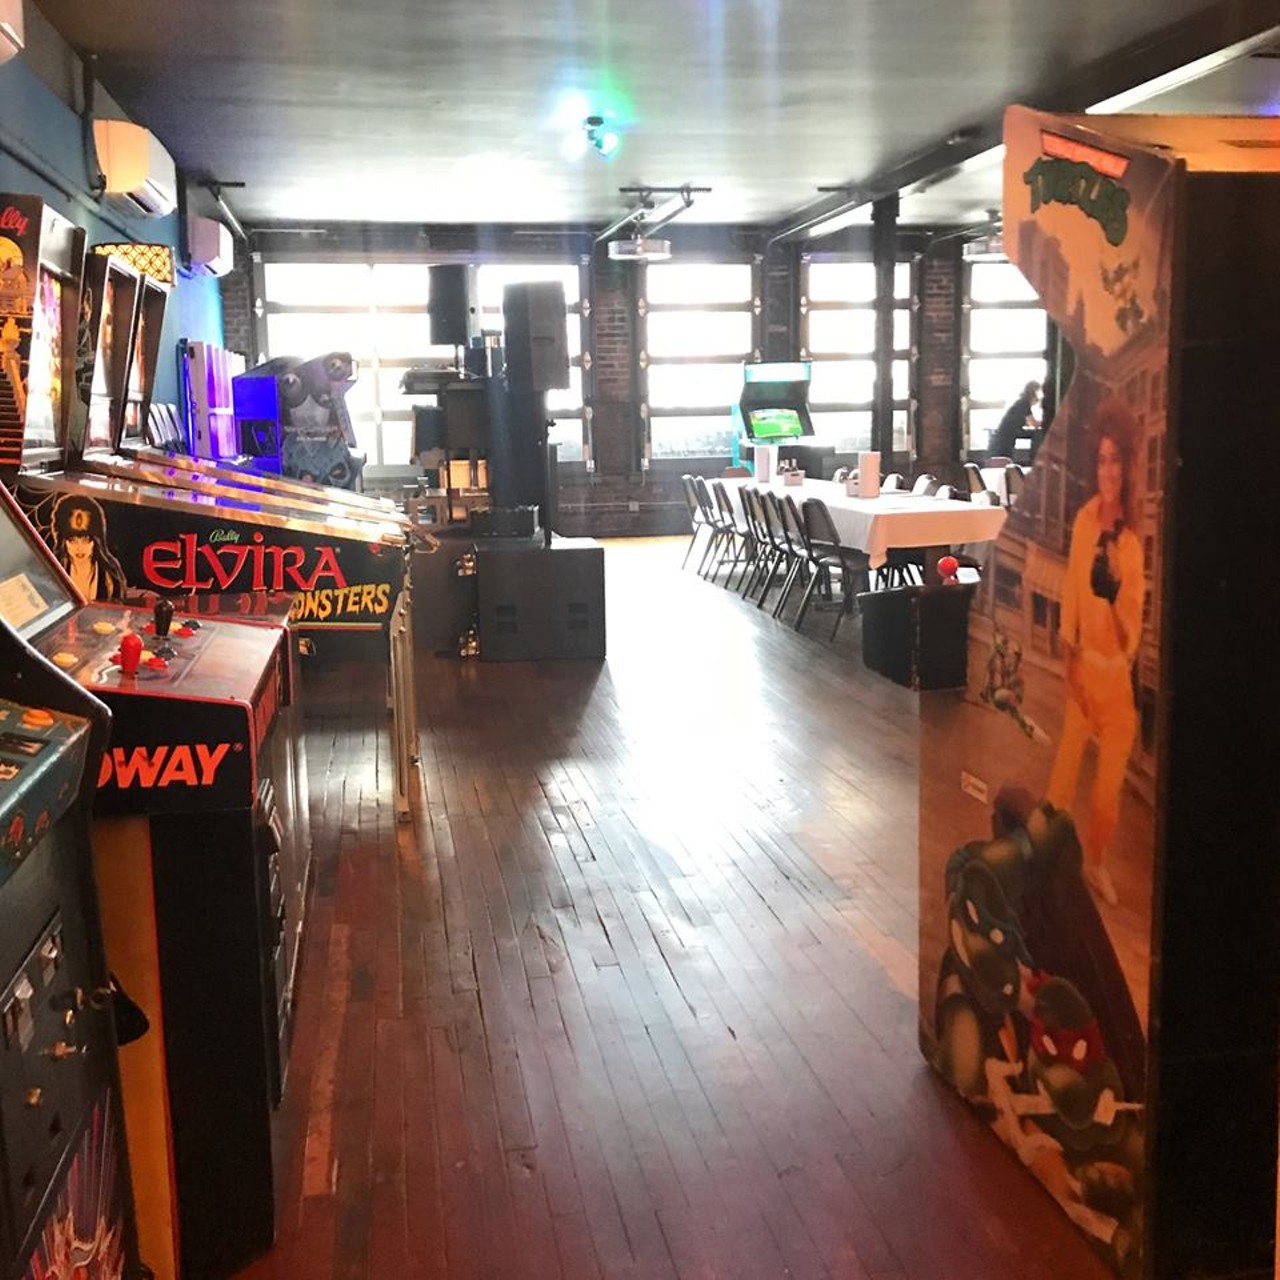 Pop+Offworld
128 Cadillac Square, Detroit; 313-961-9249
Another way to have fun without totally assaulting your bank account, is to visit Pop + Offworld. This arcade features a full bar, live entertainment, and New York-style pizza.
Photo via Facebook